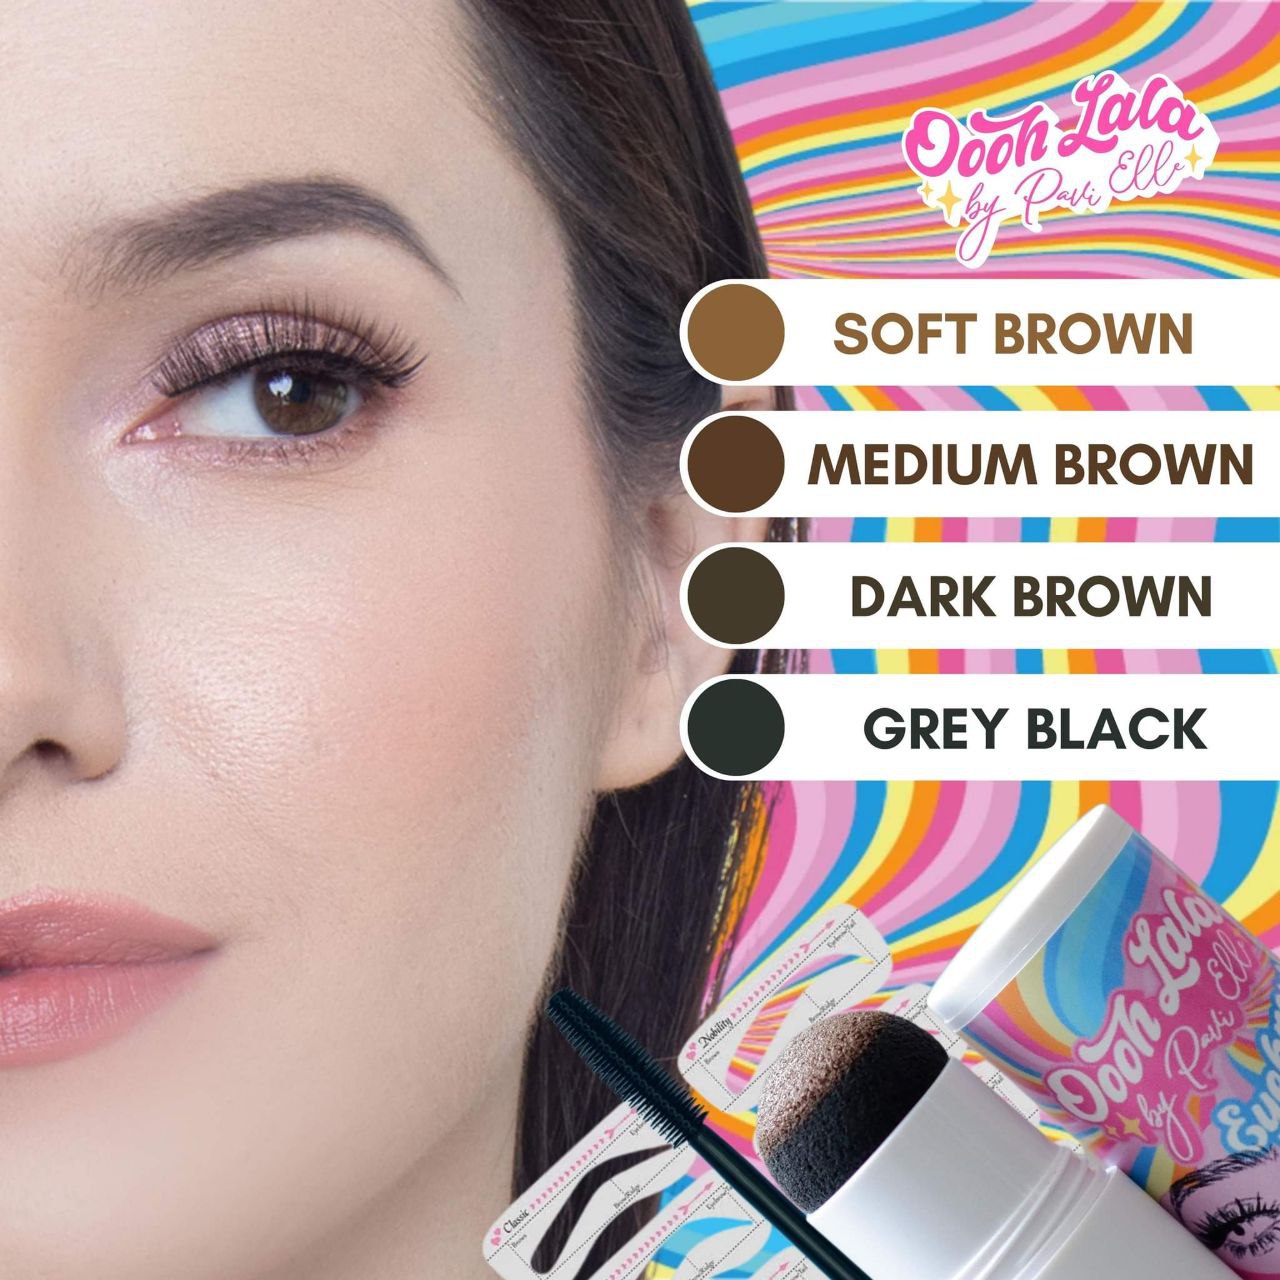 Oooh Lala by Pavi Elle Brow Stamp Kit